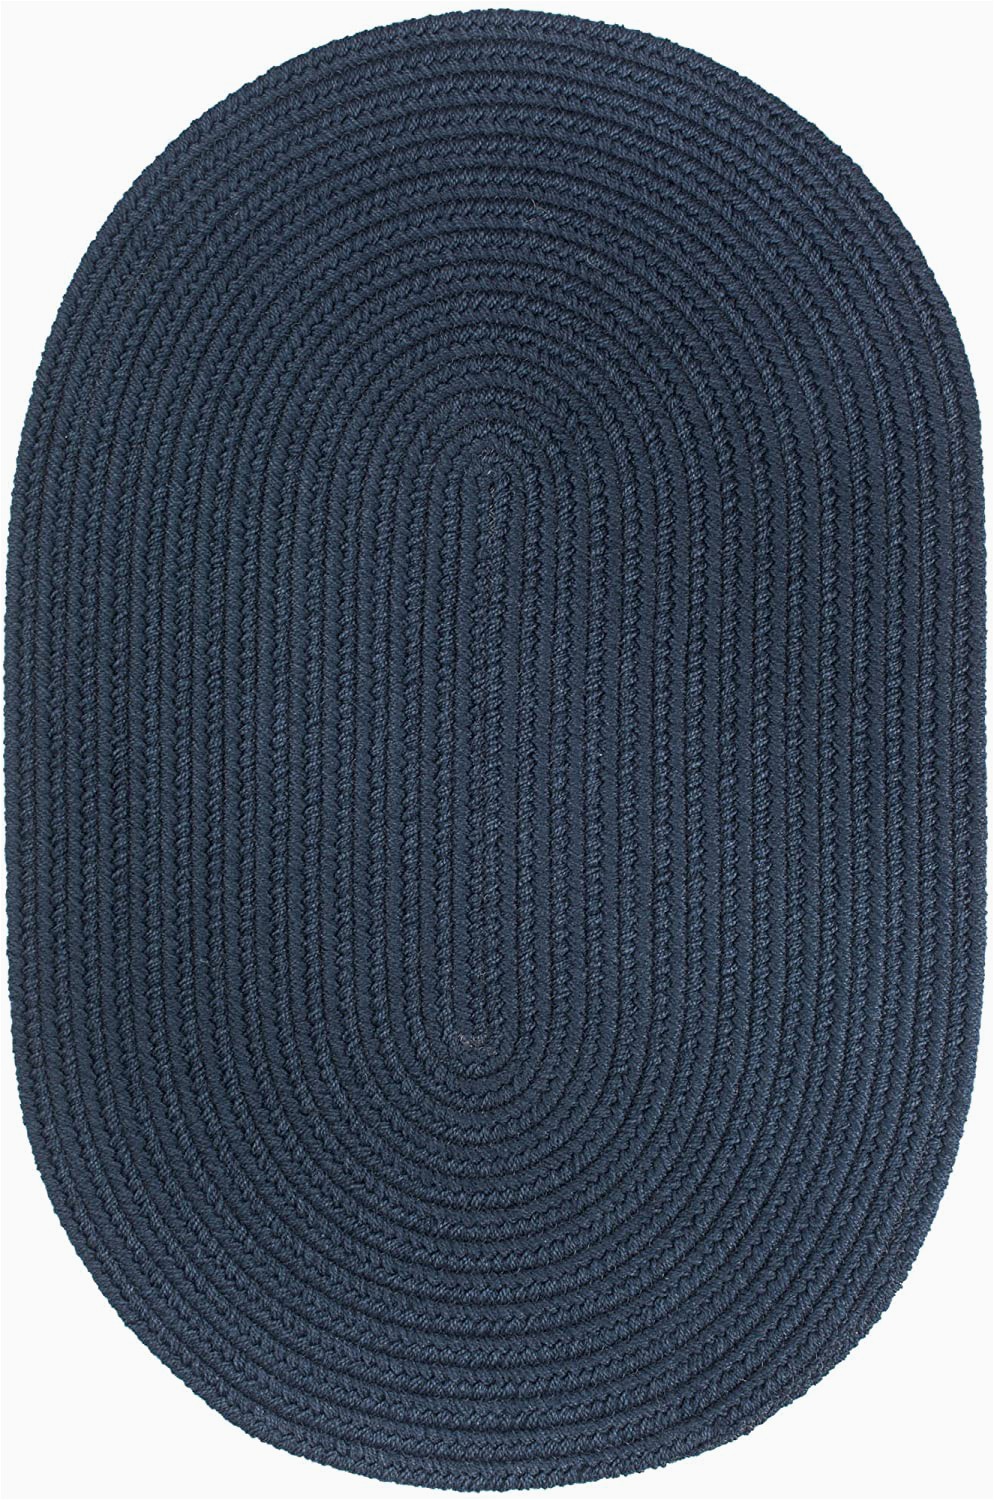 Solid Navy Blue Outdoor Rug Super area Rugs Maui solid Braided Rug Indoor Outdoor Washable Reversible Carpet Navy Blue 3 X 5 Oval